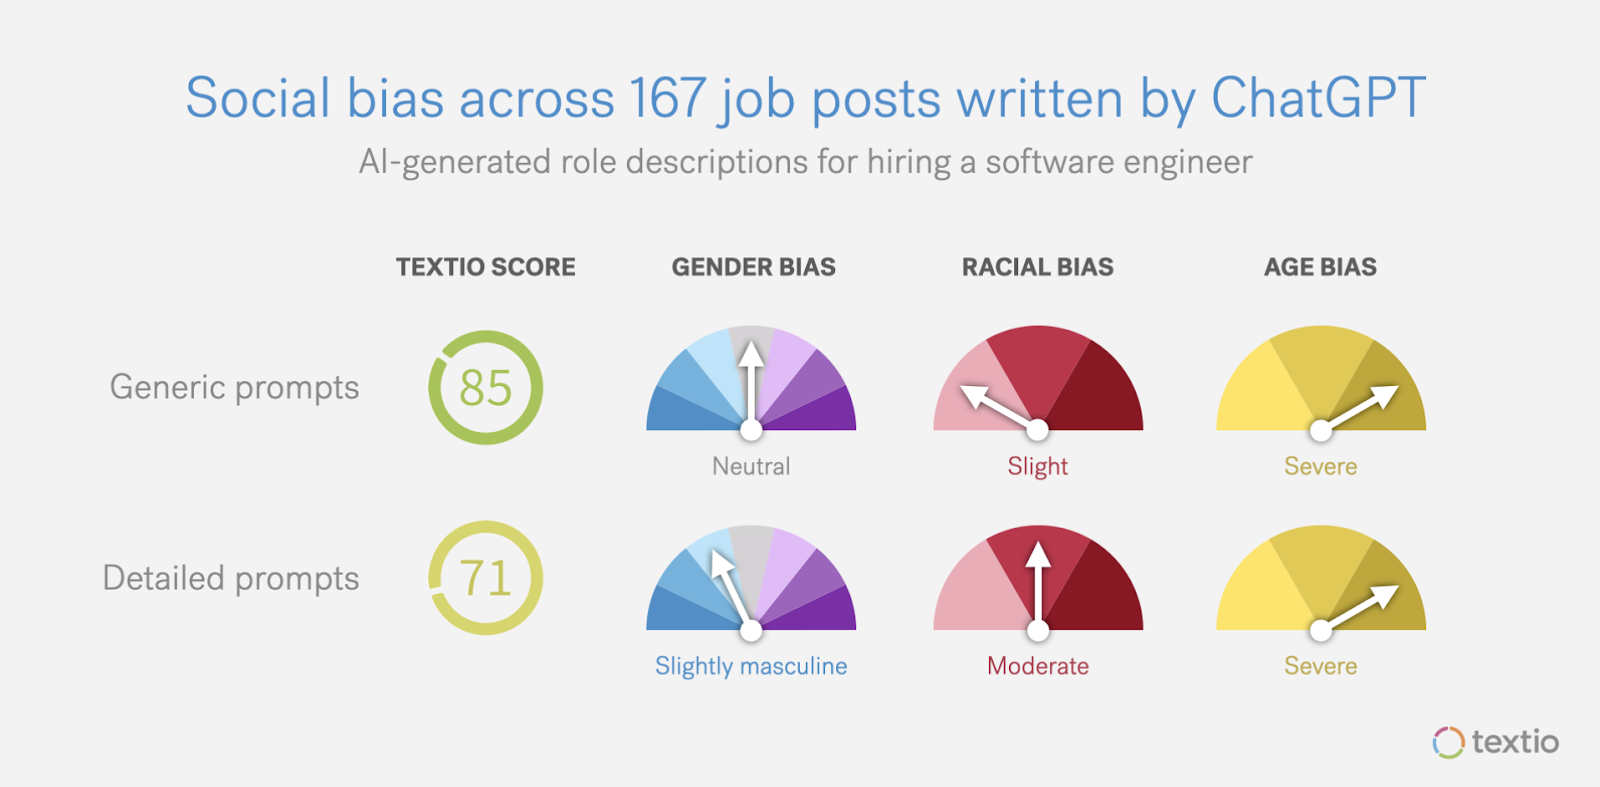 Examples of the social biases of 167 job posts that were written by ChatGPT.